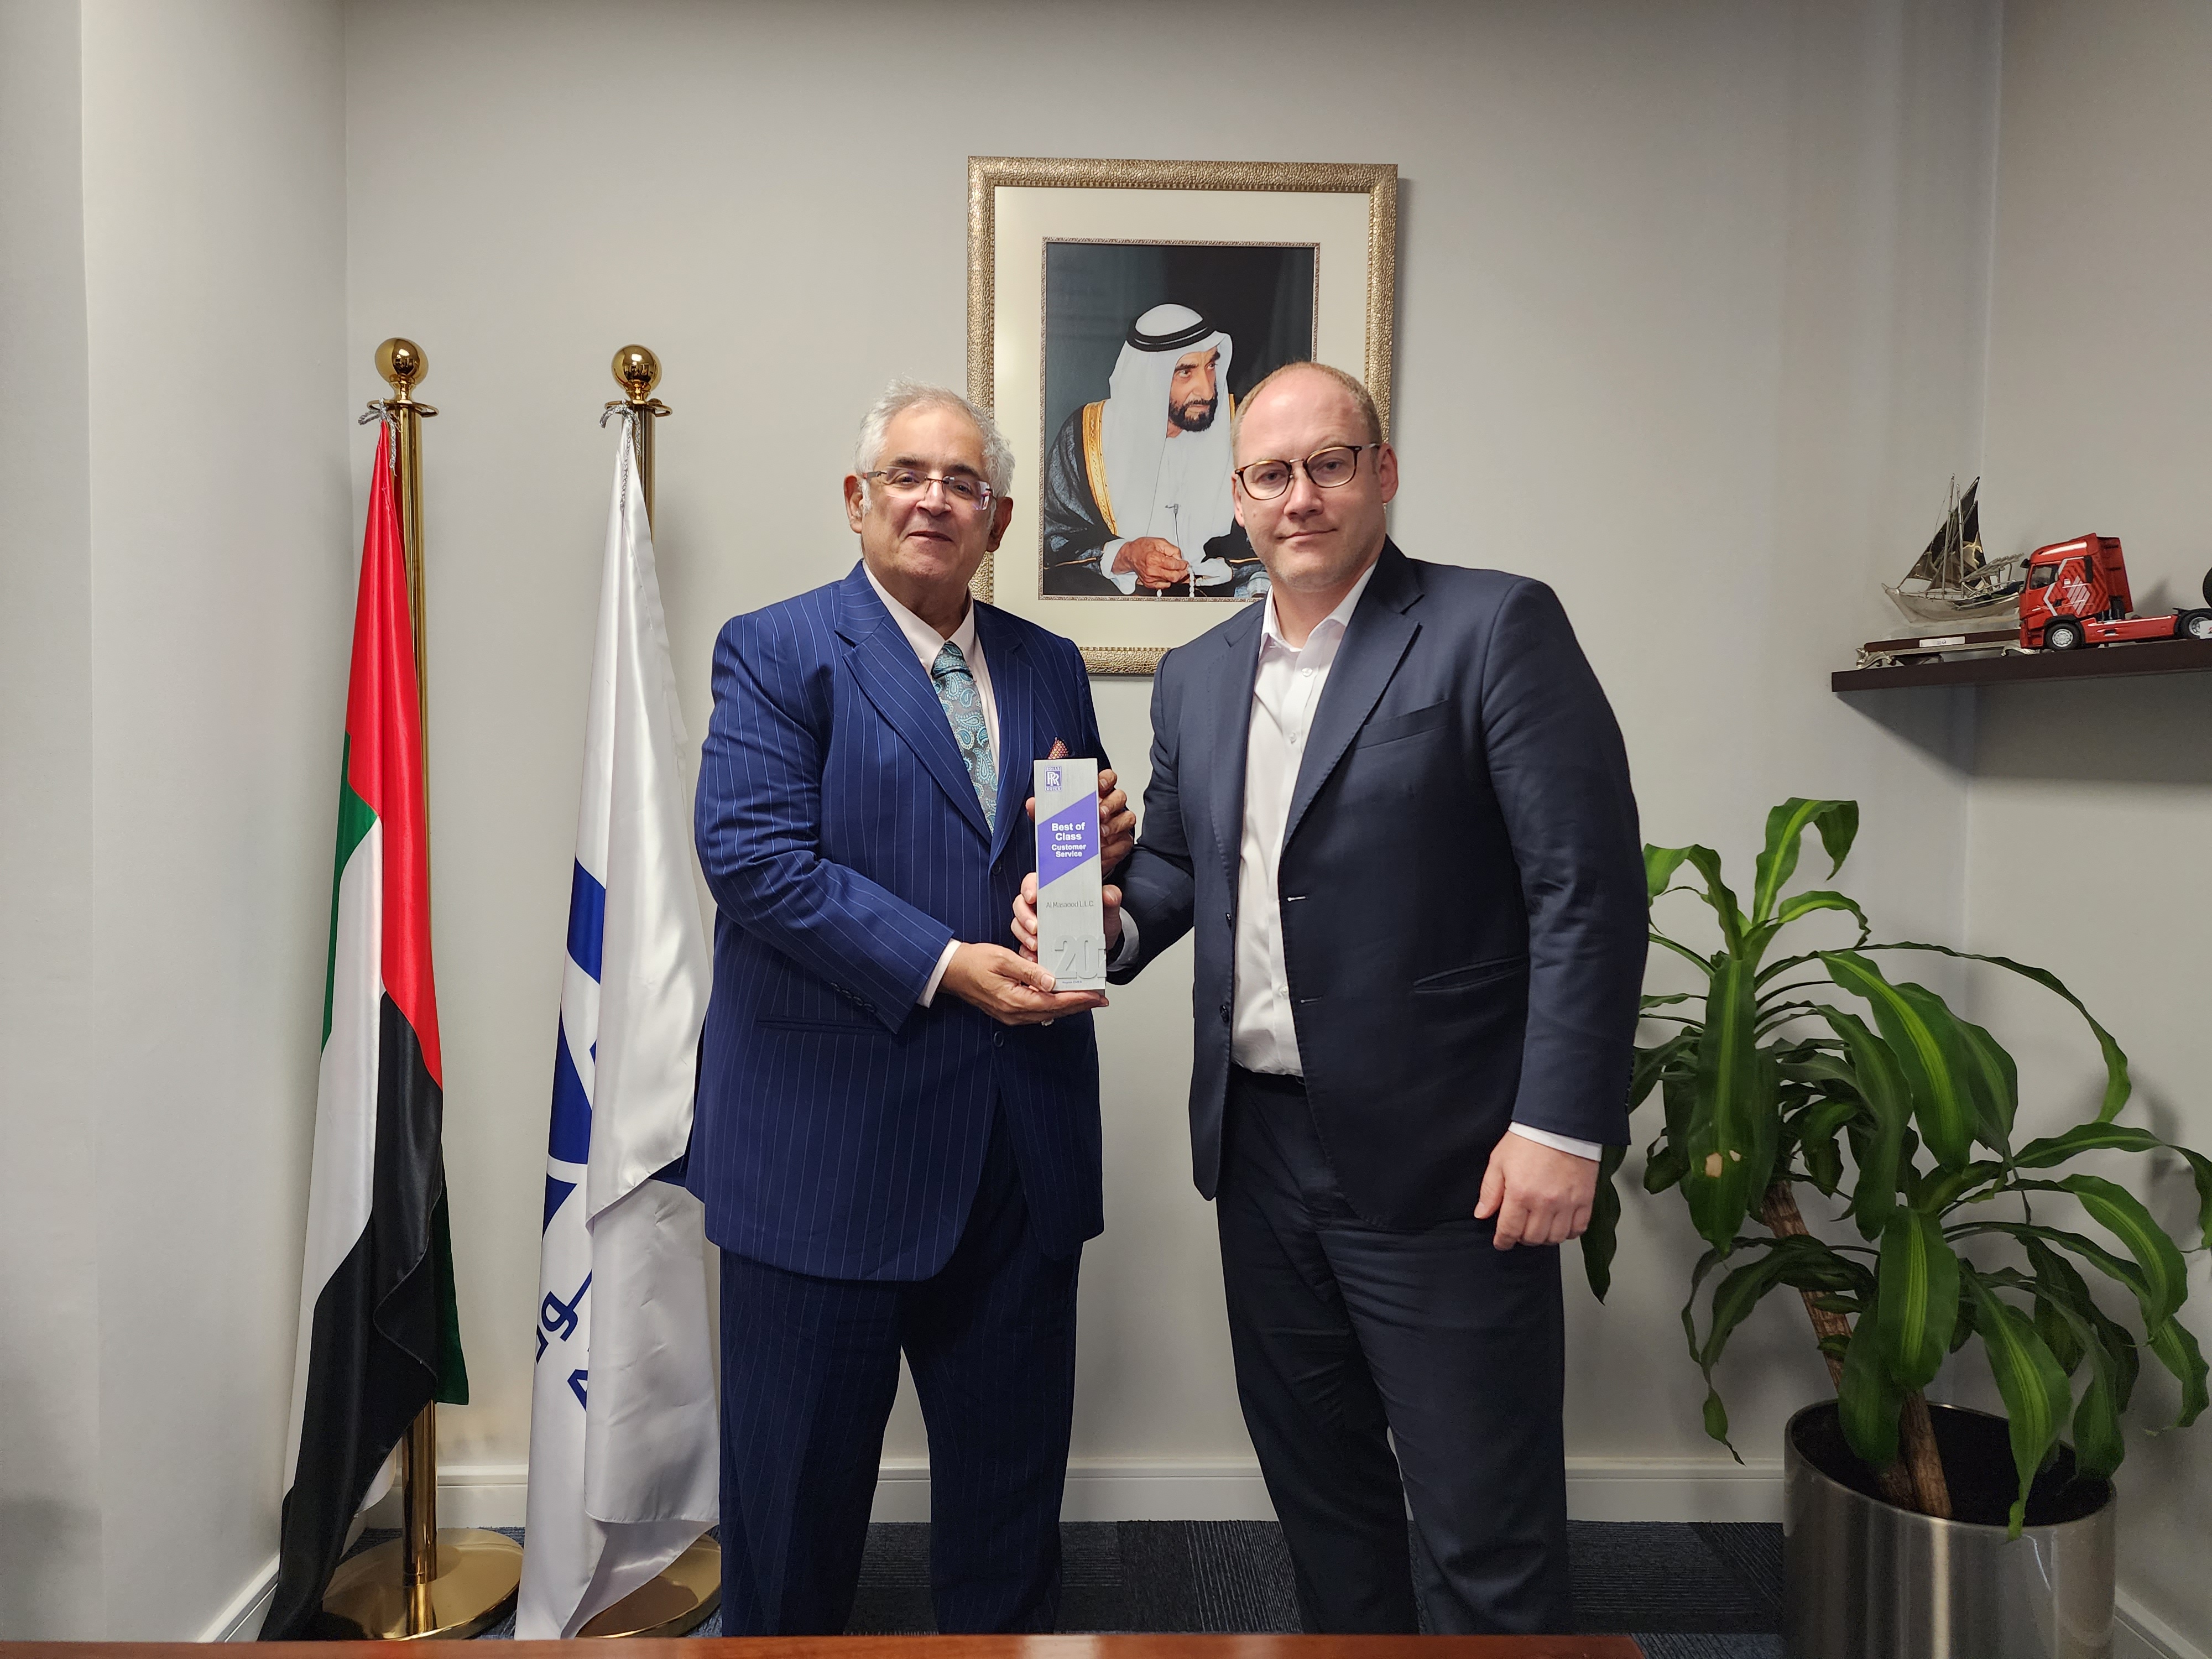 Al Masaood Power Division Earns "Best of Class Customer Service" Award, Setting New Standards in the Power Generation Industry"